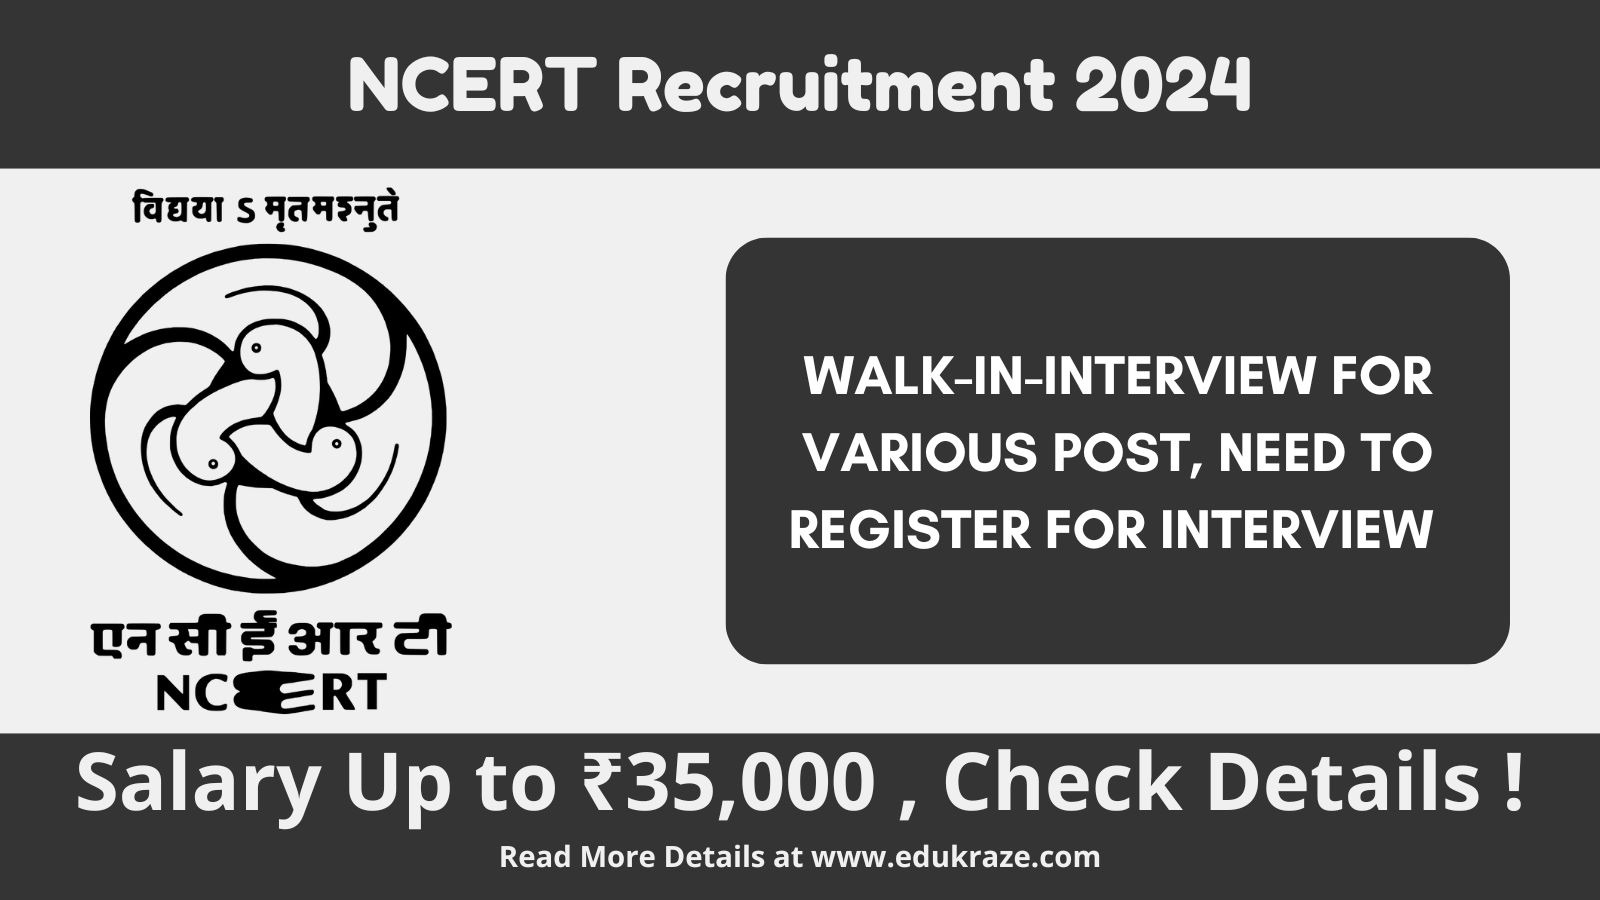 NCERT Multiple Jobs Opening, Recruitment by Walk-In-Interview!